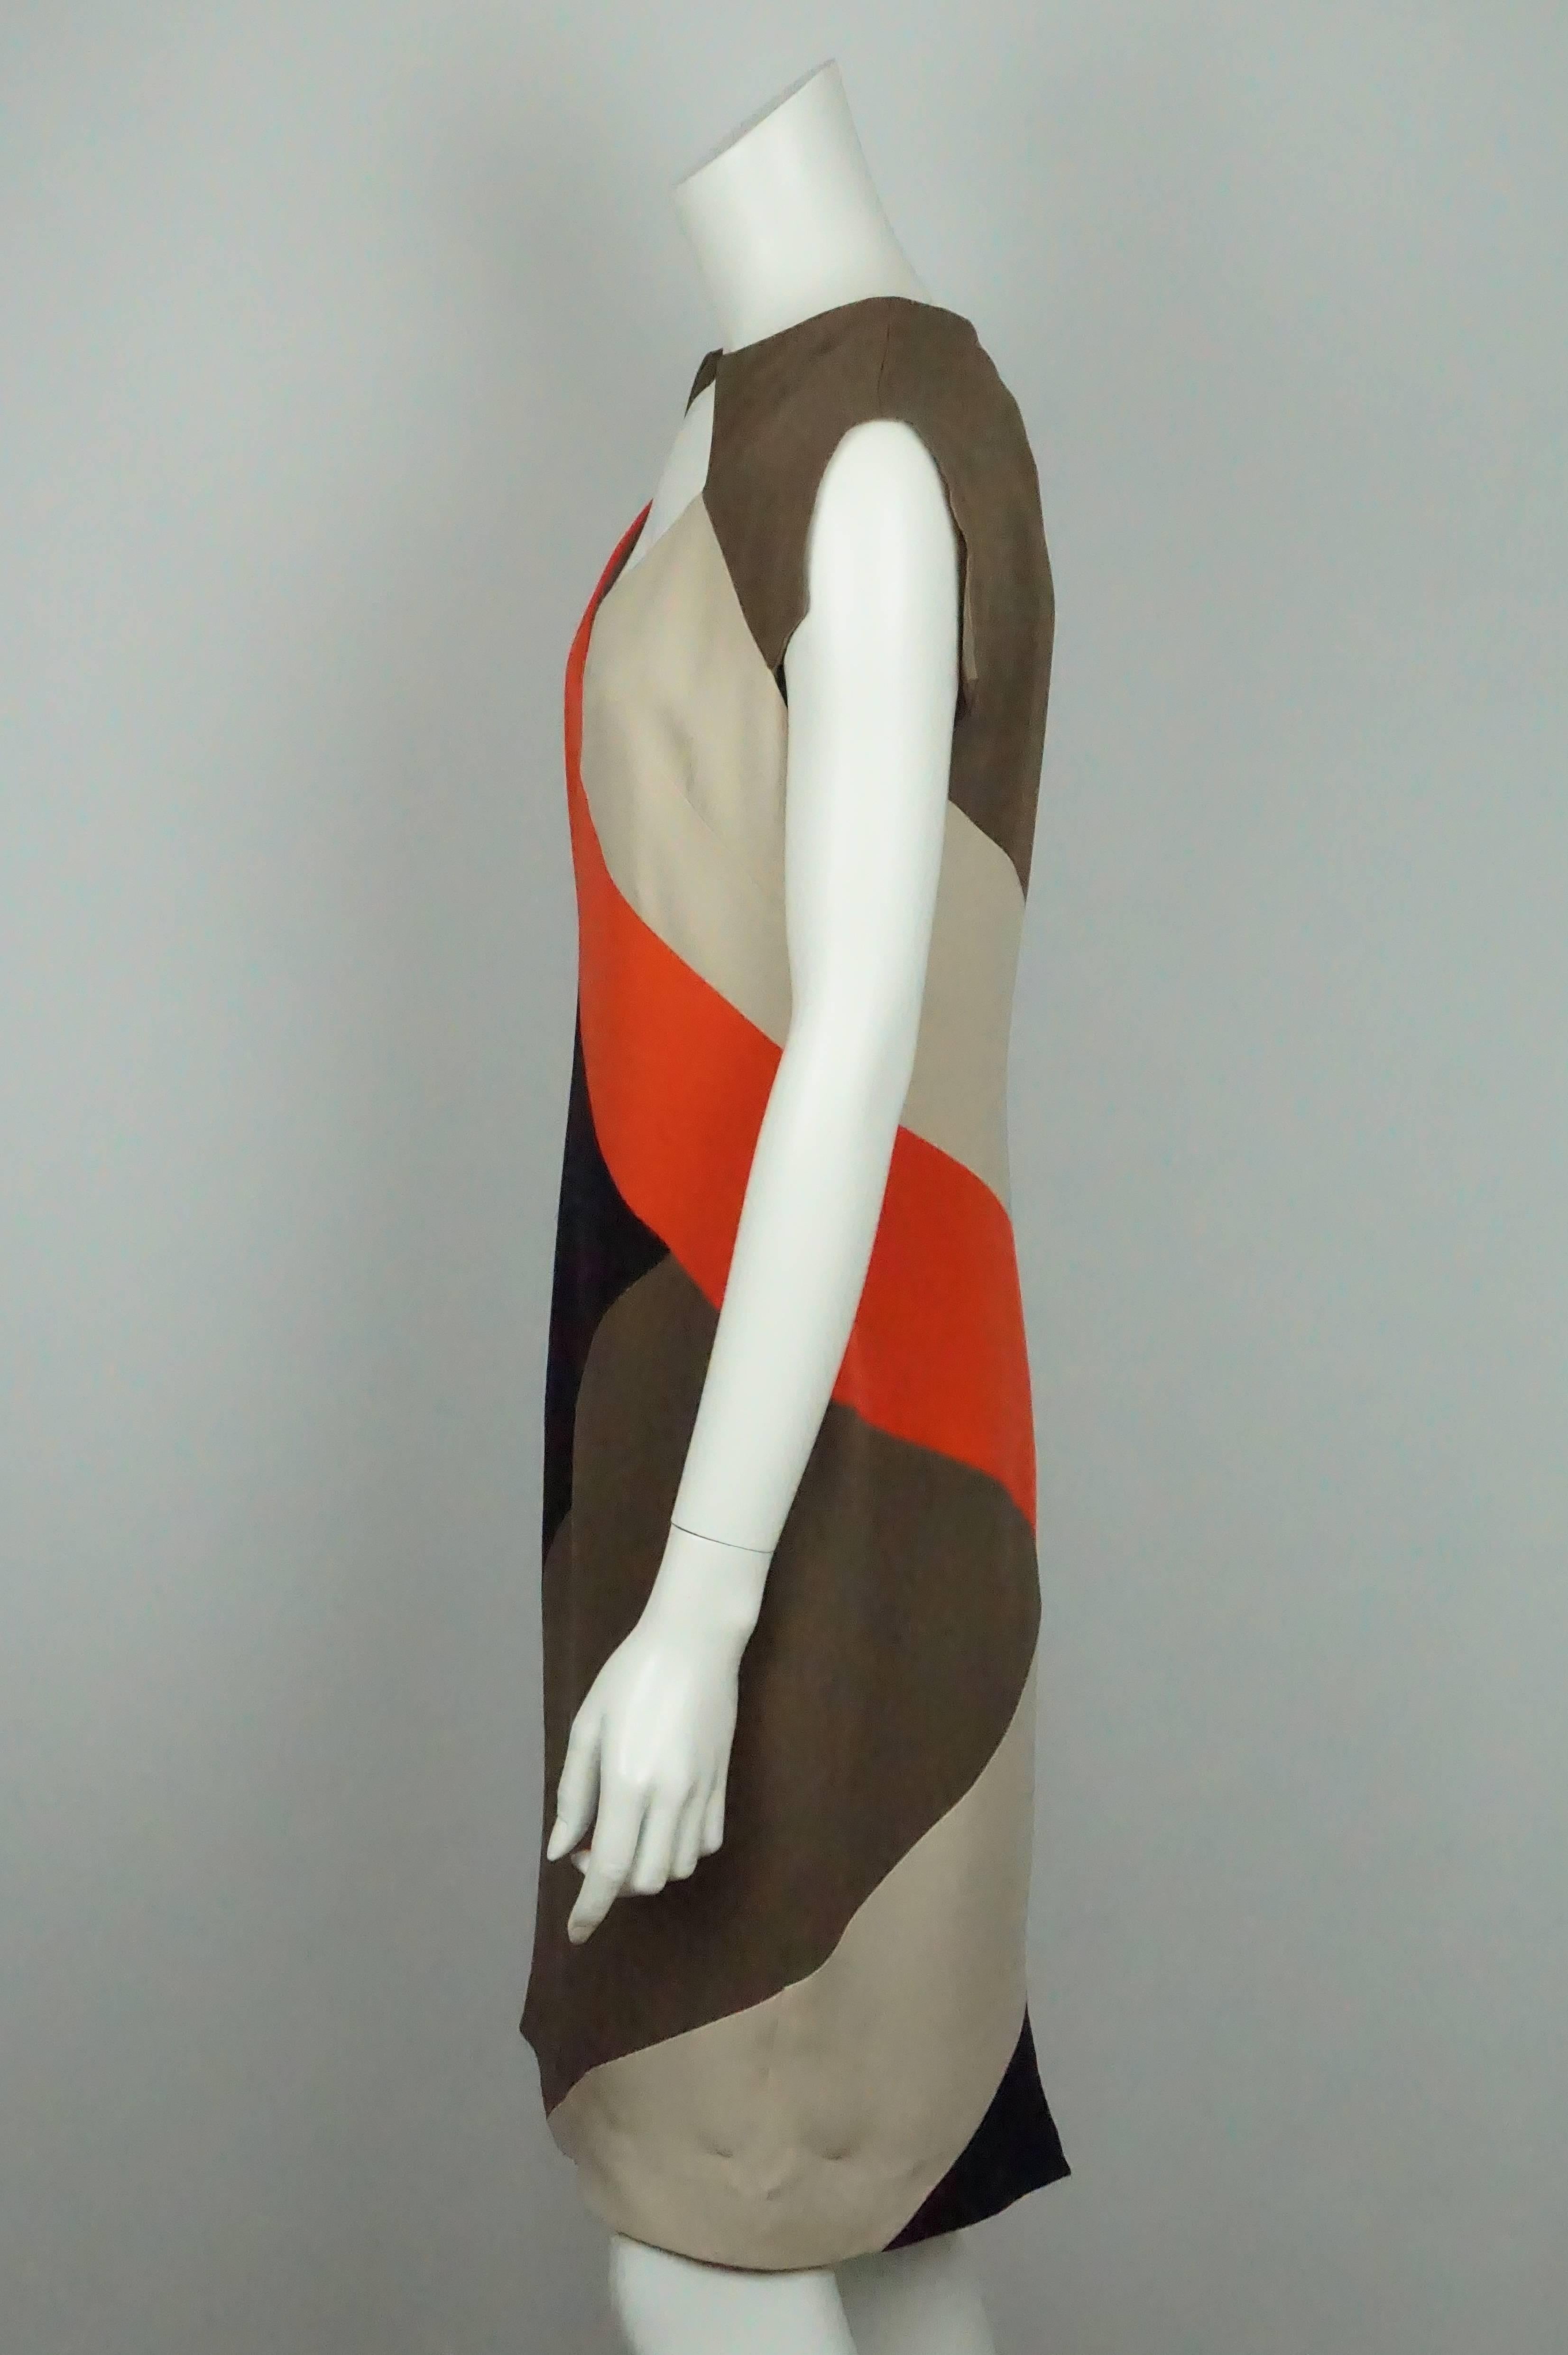 Lela Rose Brown/Orange/Beige S/S Silk Dress - 8  This beautiful dress is in good condition. There is a geometric pattern throughout the dress that contains brown, orange, and beige colors. It is fully lined in silk. There is a small kick pleat on